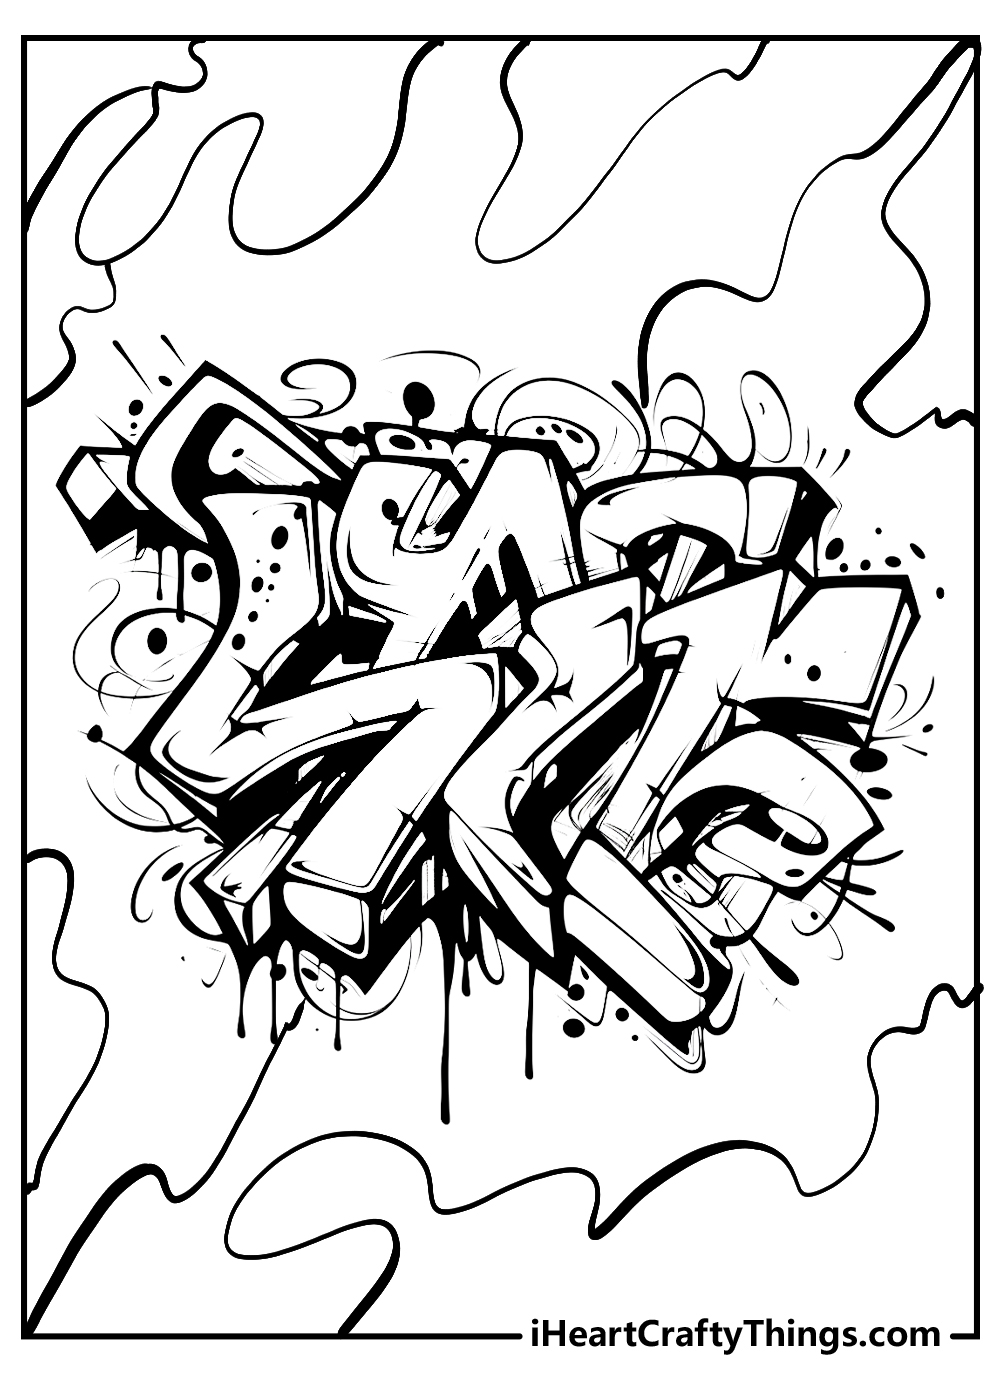 graffiti coloring book for adults